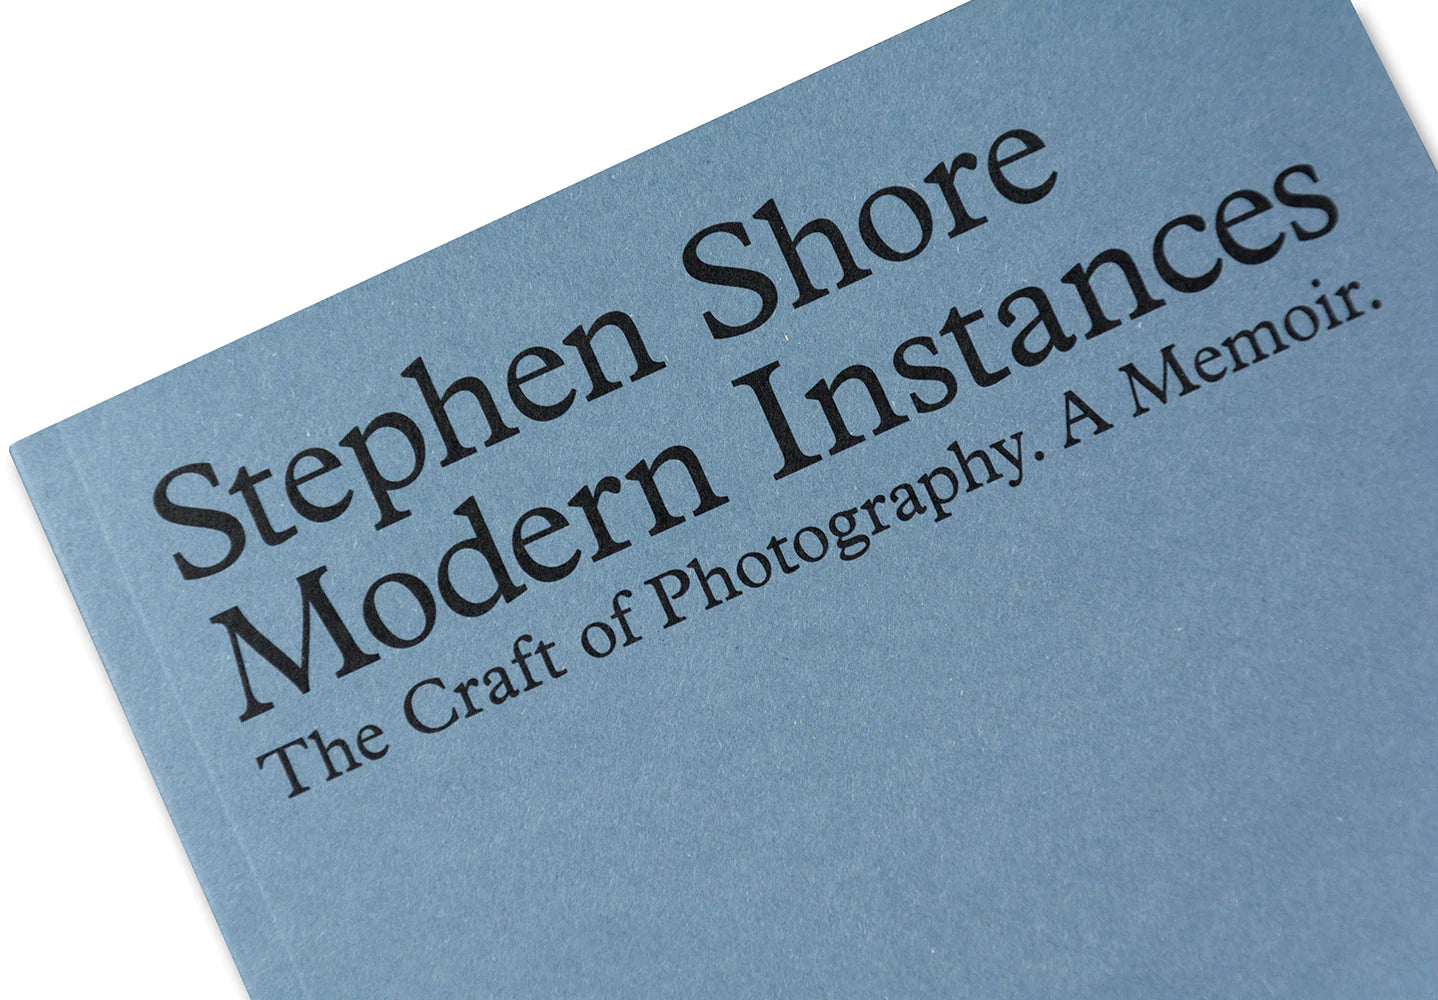 Stephen Shore - Modern Instances: The Craft of Photography (Signed / Expanded Ed.)